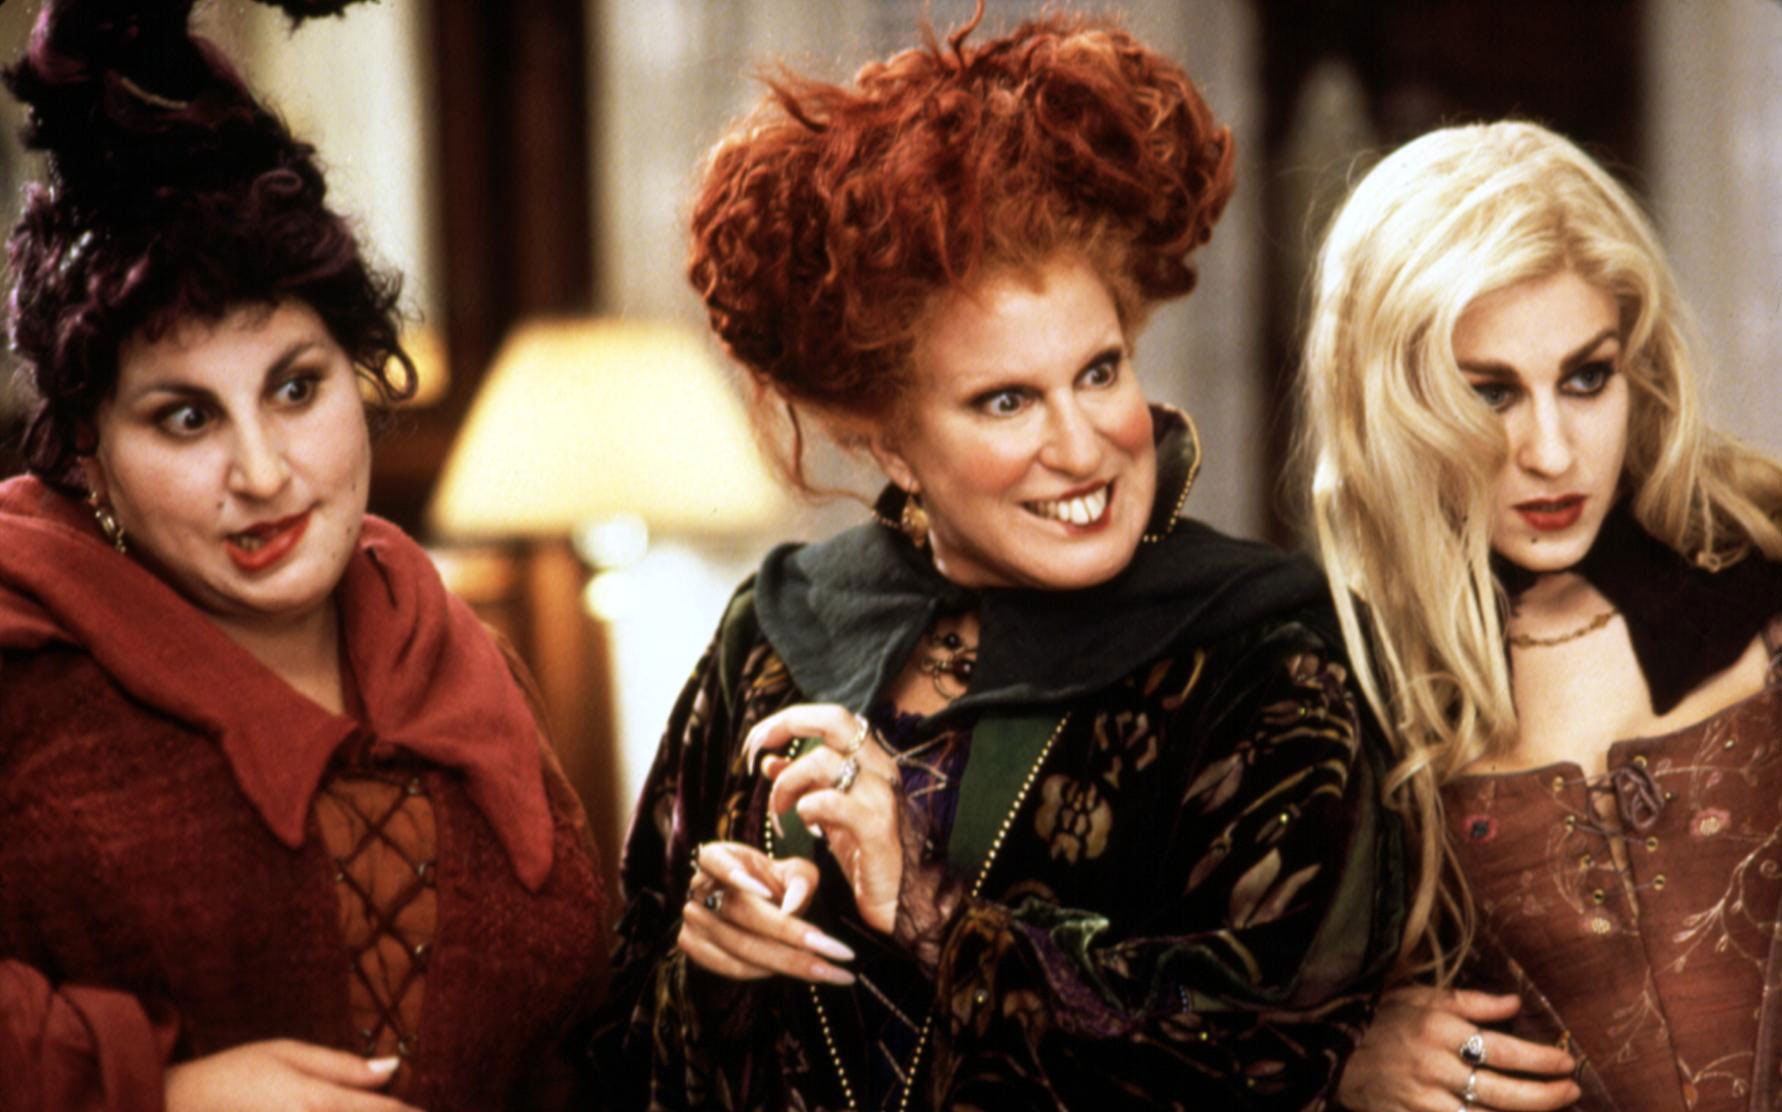 YAS WITCHES: ‘Hocus Pocus’ Might Be Getting A Queer & Racially Diverse Sequel